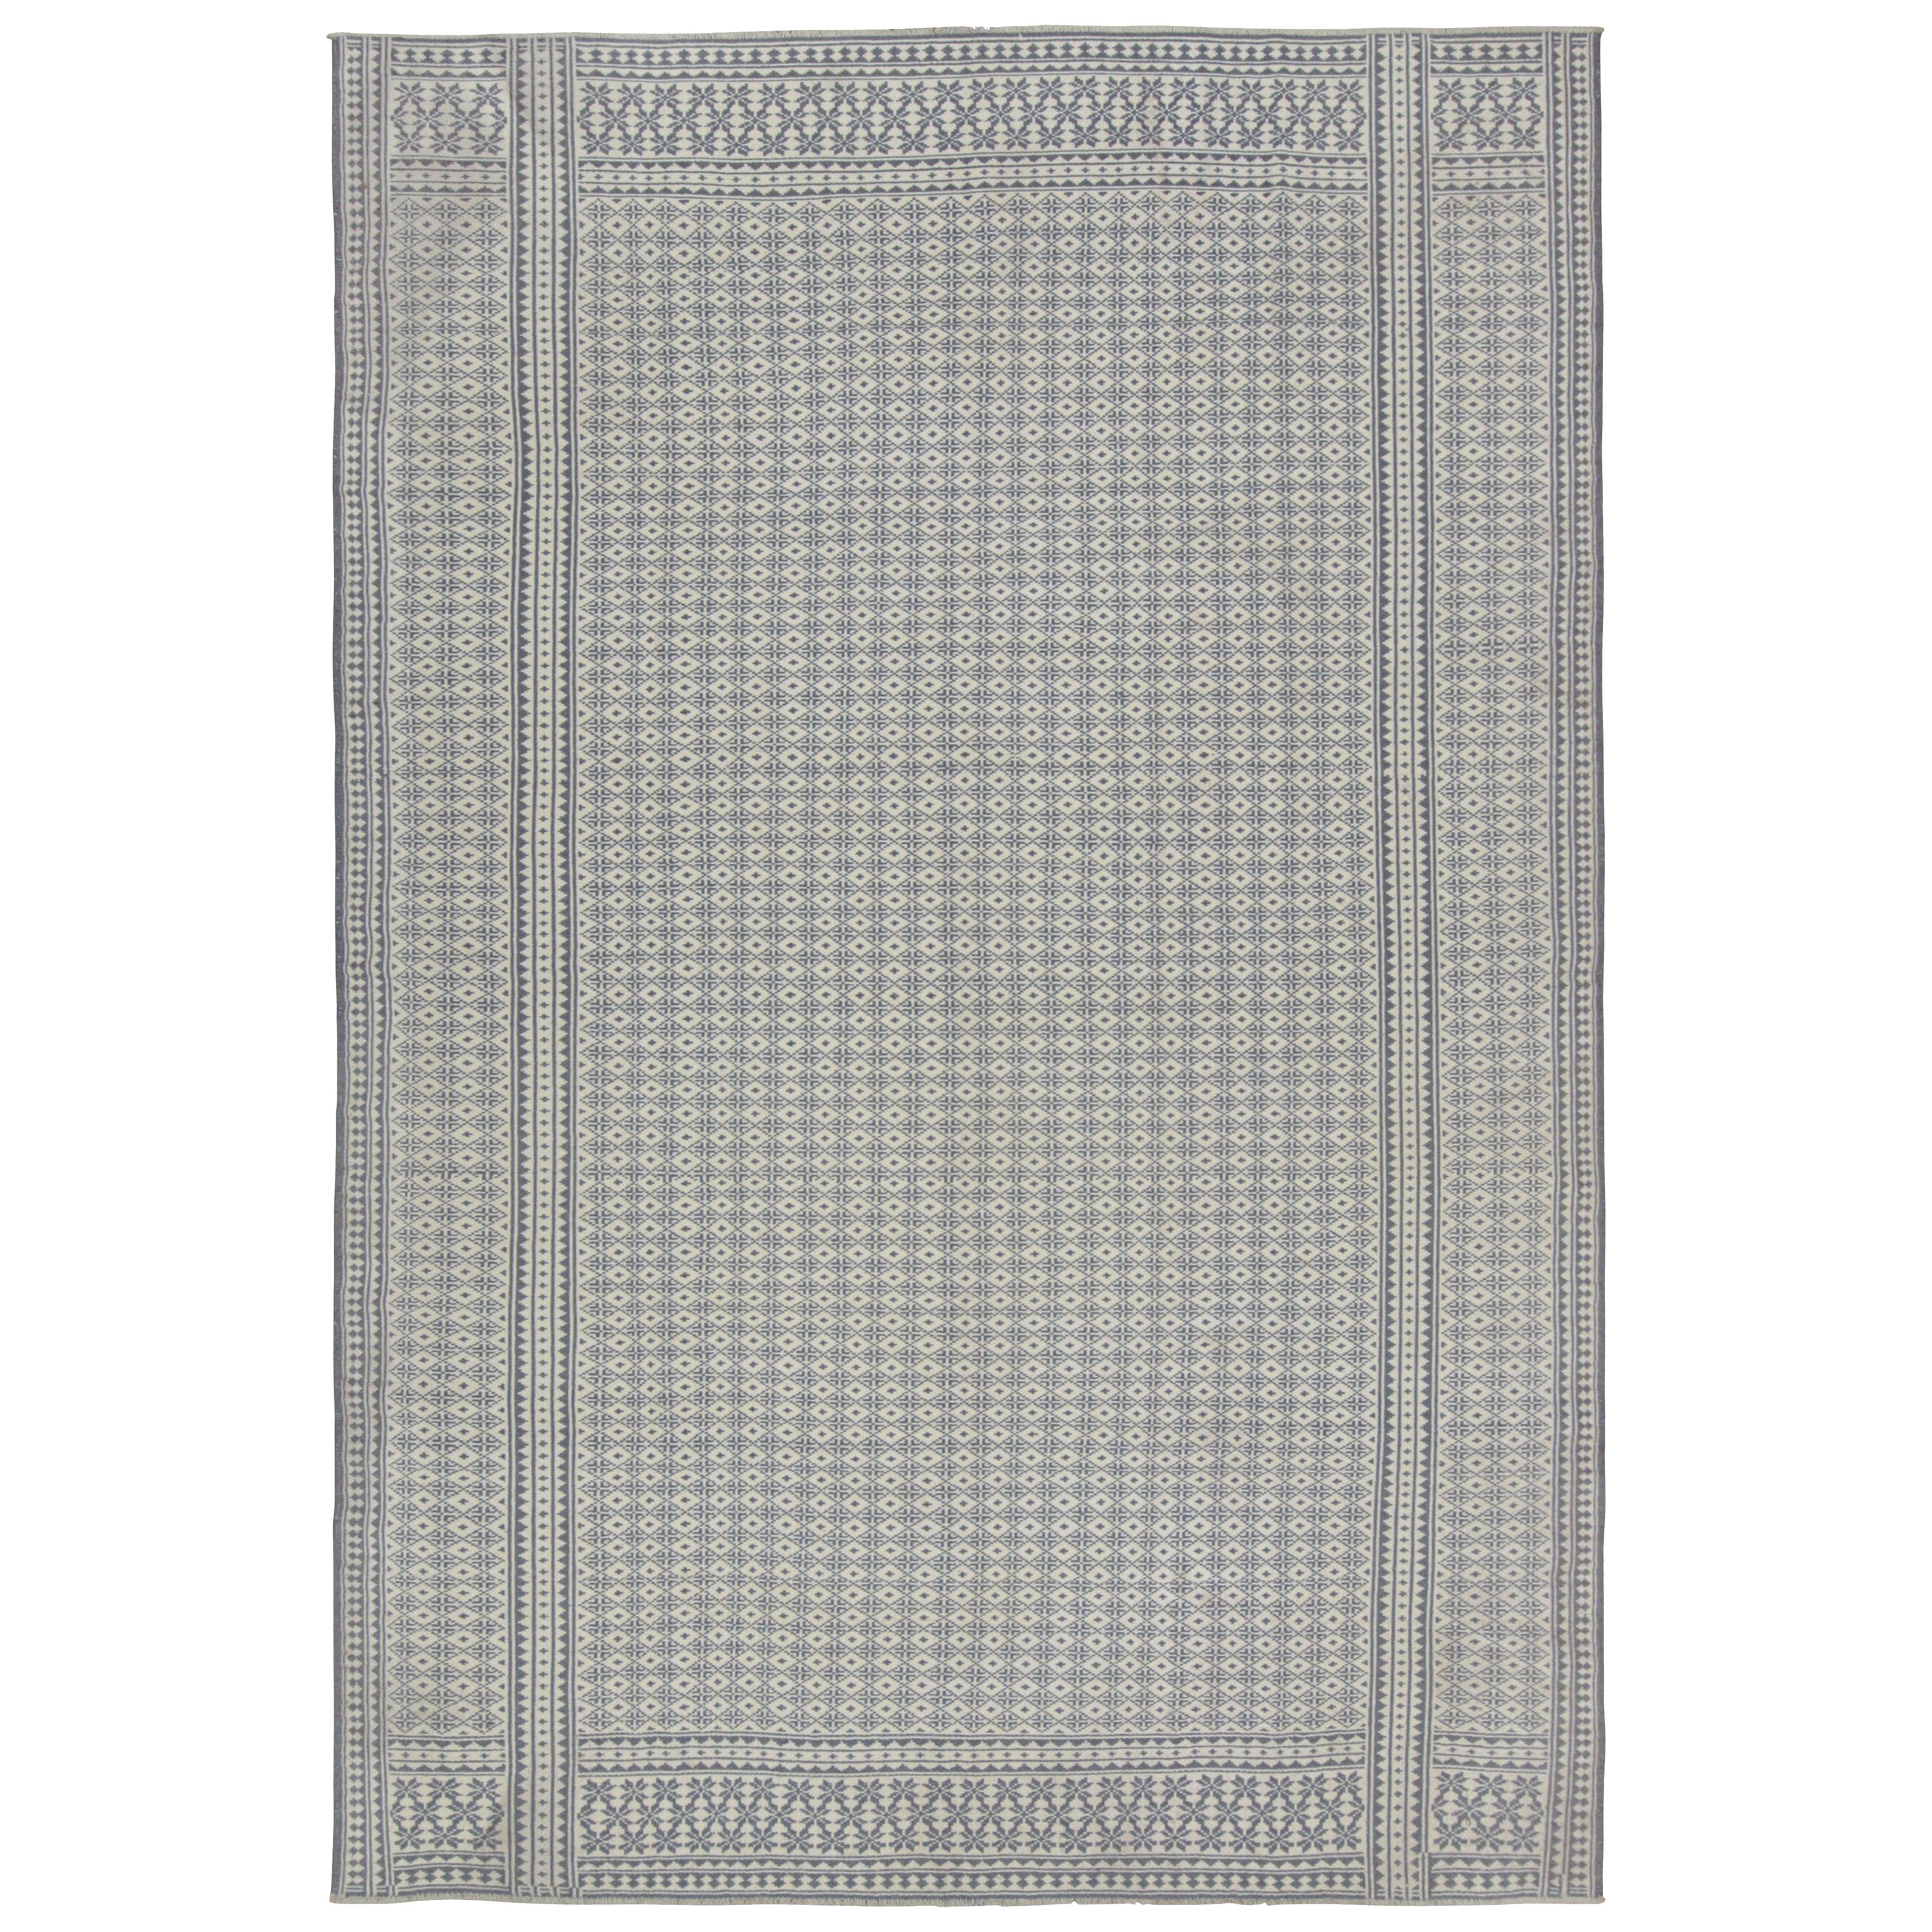 Rug & Kilim’s Zilu Style Kilim in White and Blue-Gray Geometric Pattern  For Sale